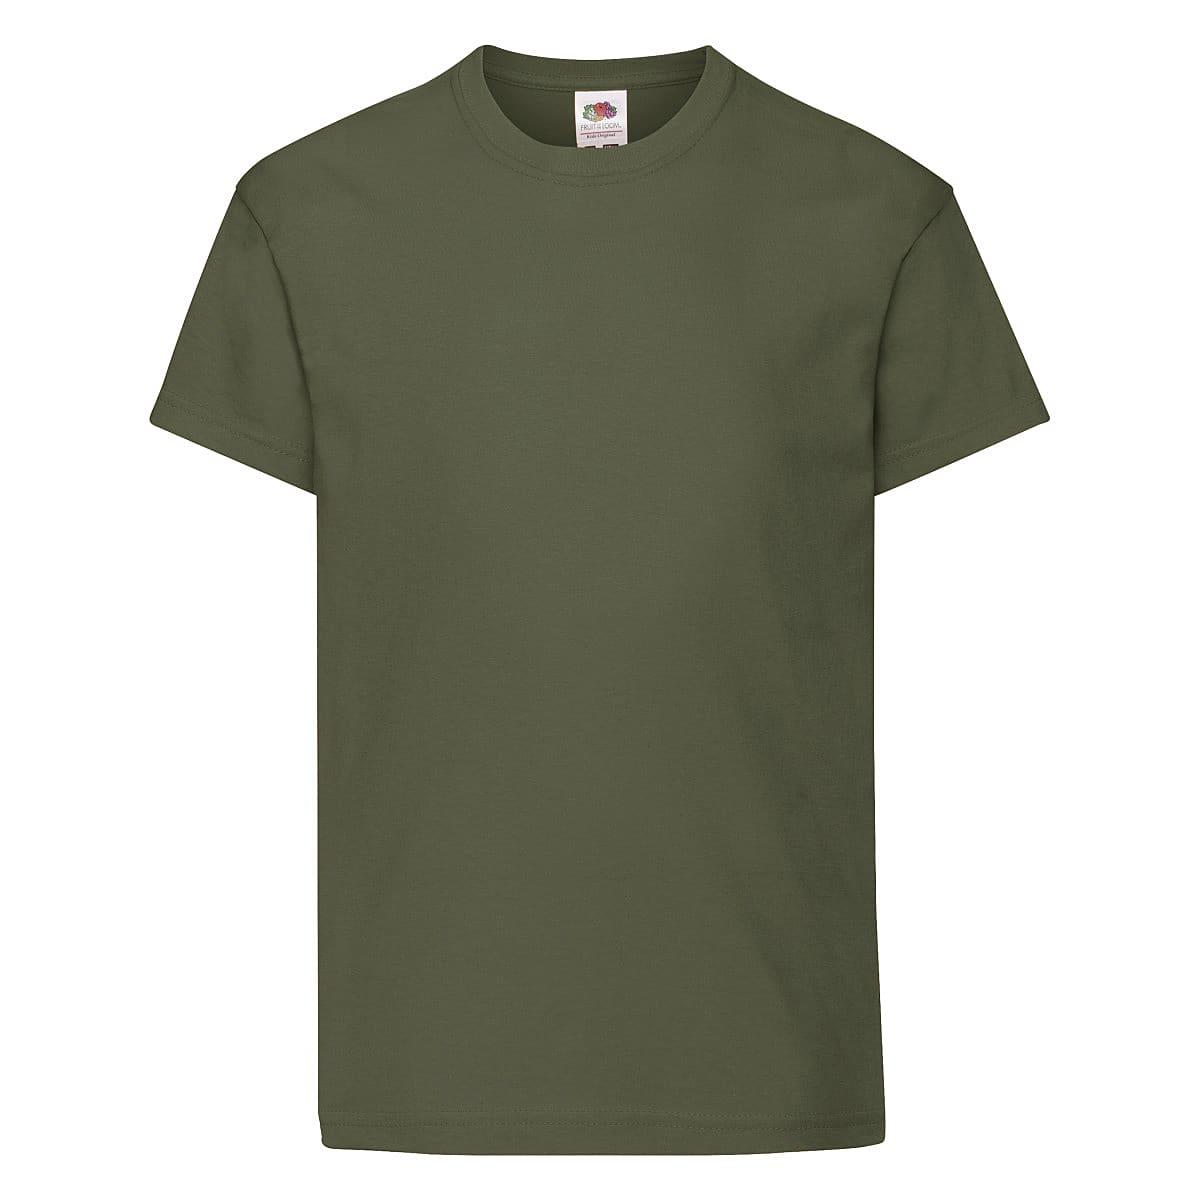 Fruit Of The Loom Kids Original T-Shirt in Classic Olive (Product Code: 61019)